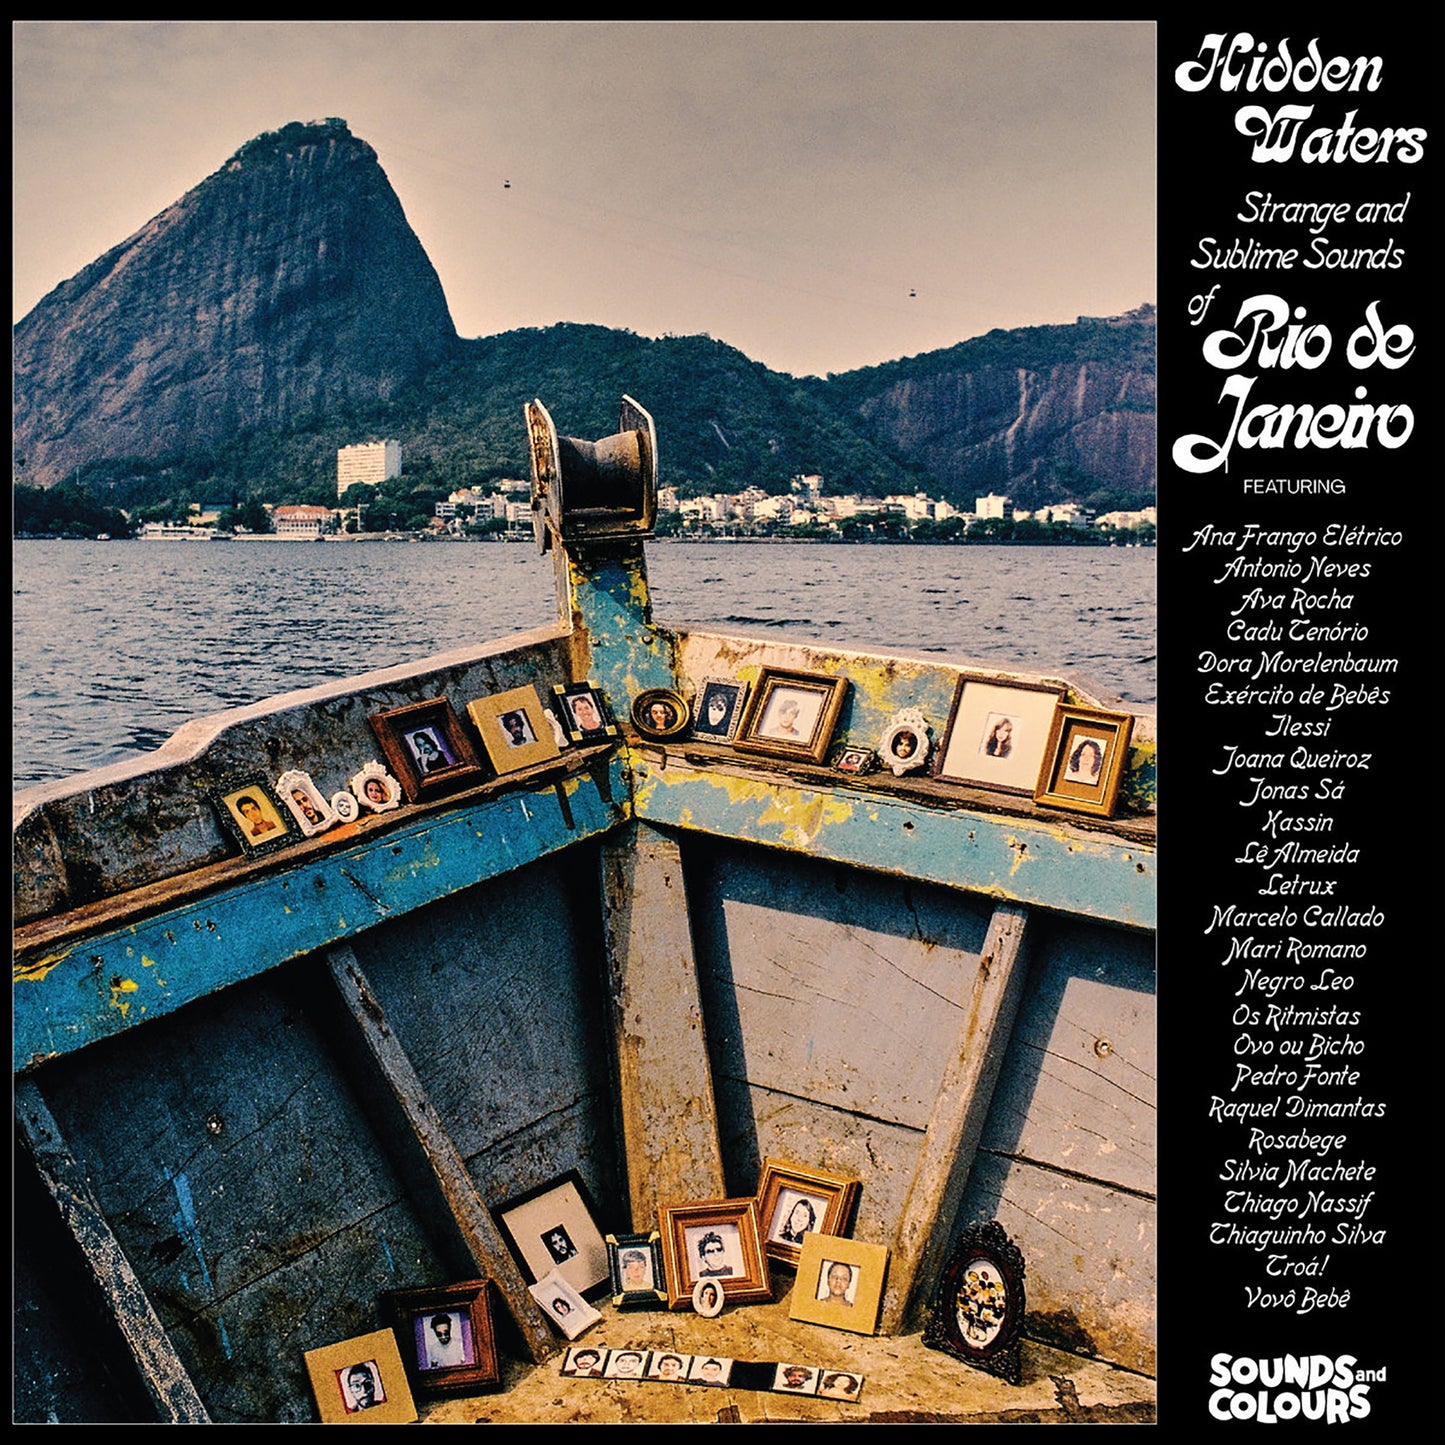 Various Artists - Hidden Waters: Strange and Sublime Sounds of Rio de Janeiro